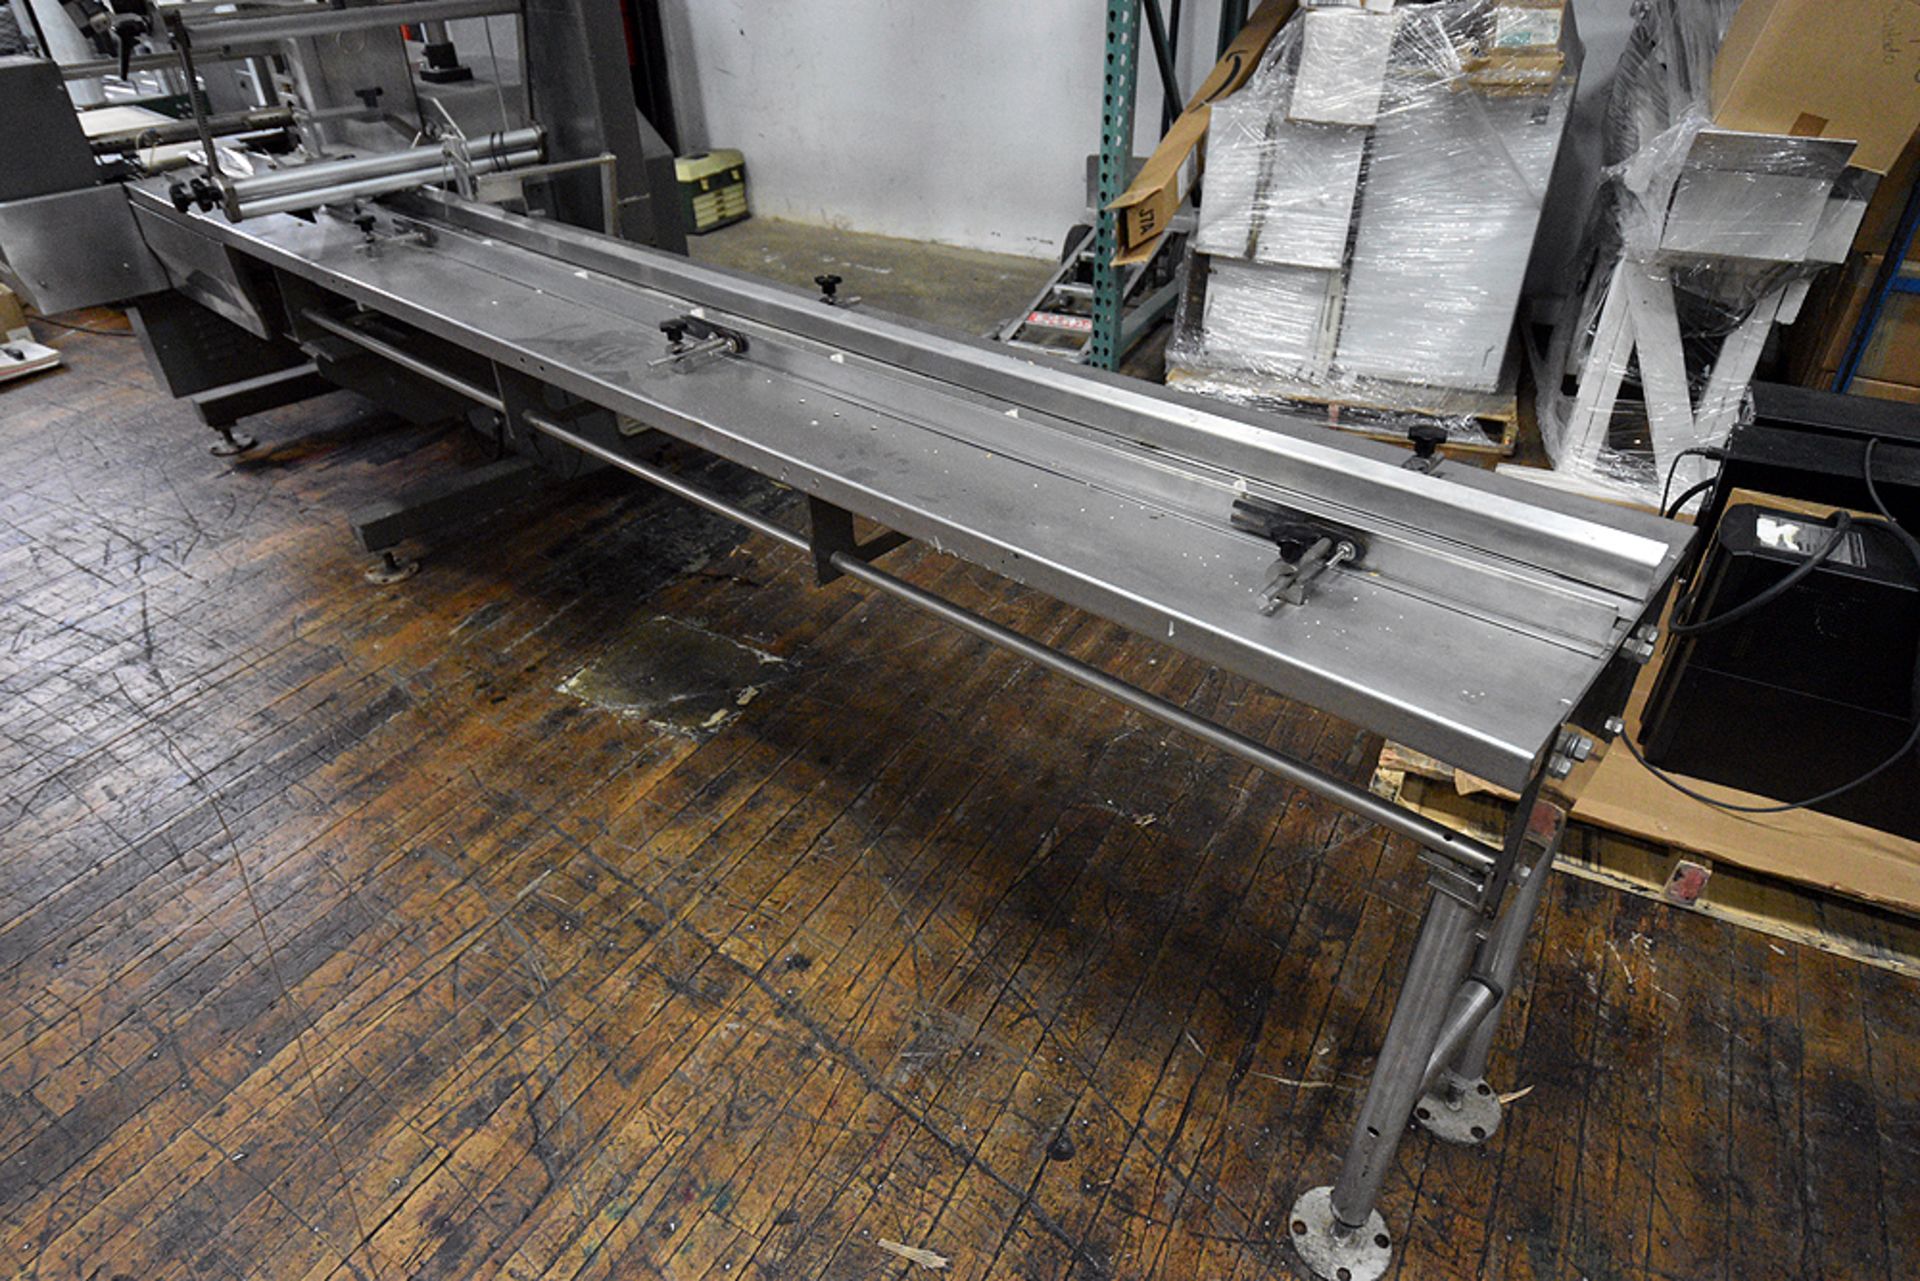 Sasib WE-150 Multi-Axis Horizontal Flo-Wrapper Line w/Attachments (See Pictures for Reference) - Image 7 of 20